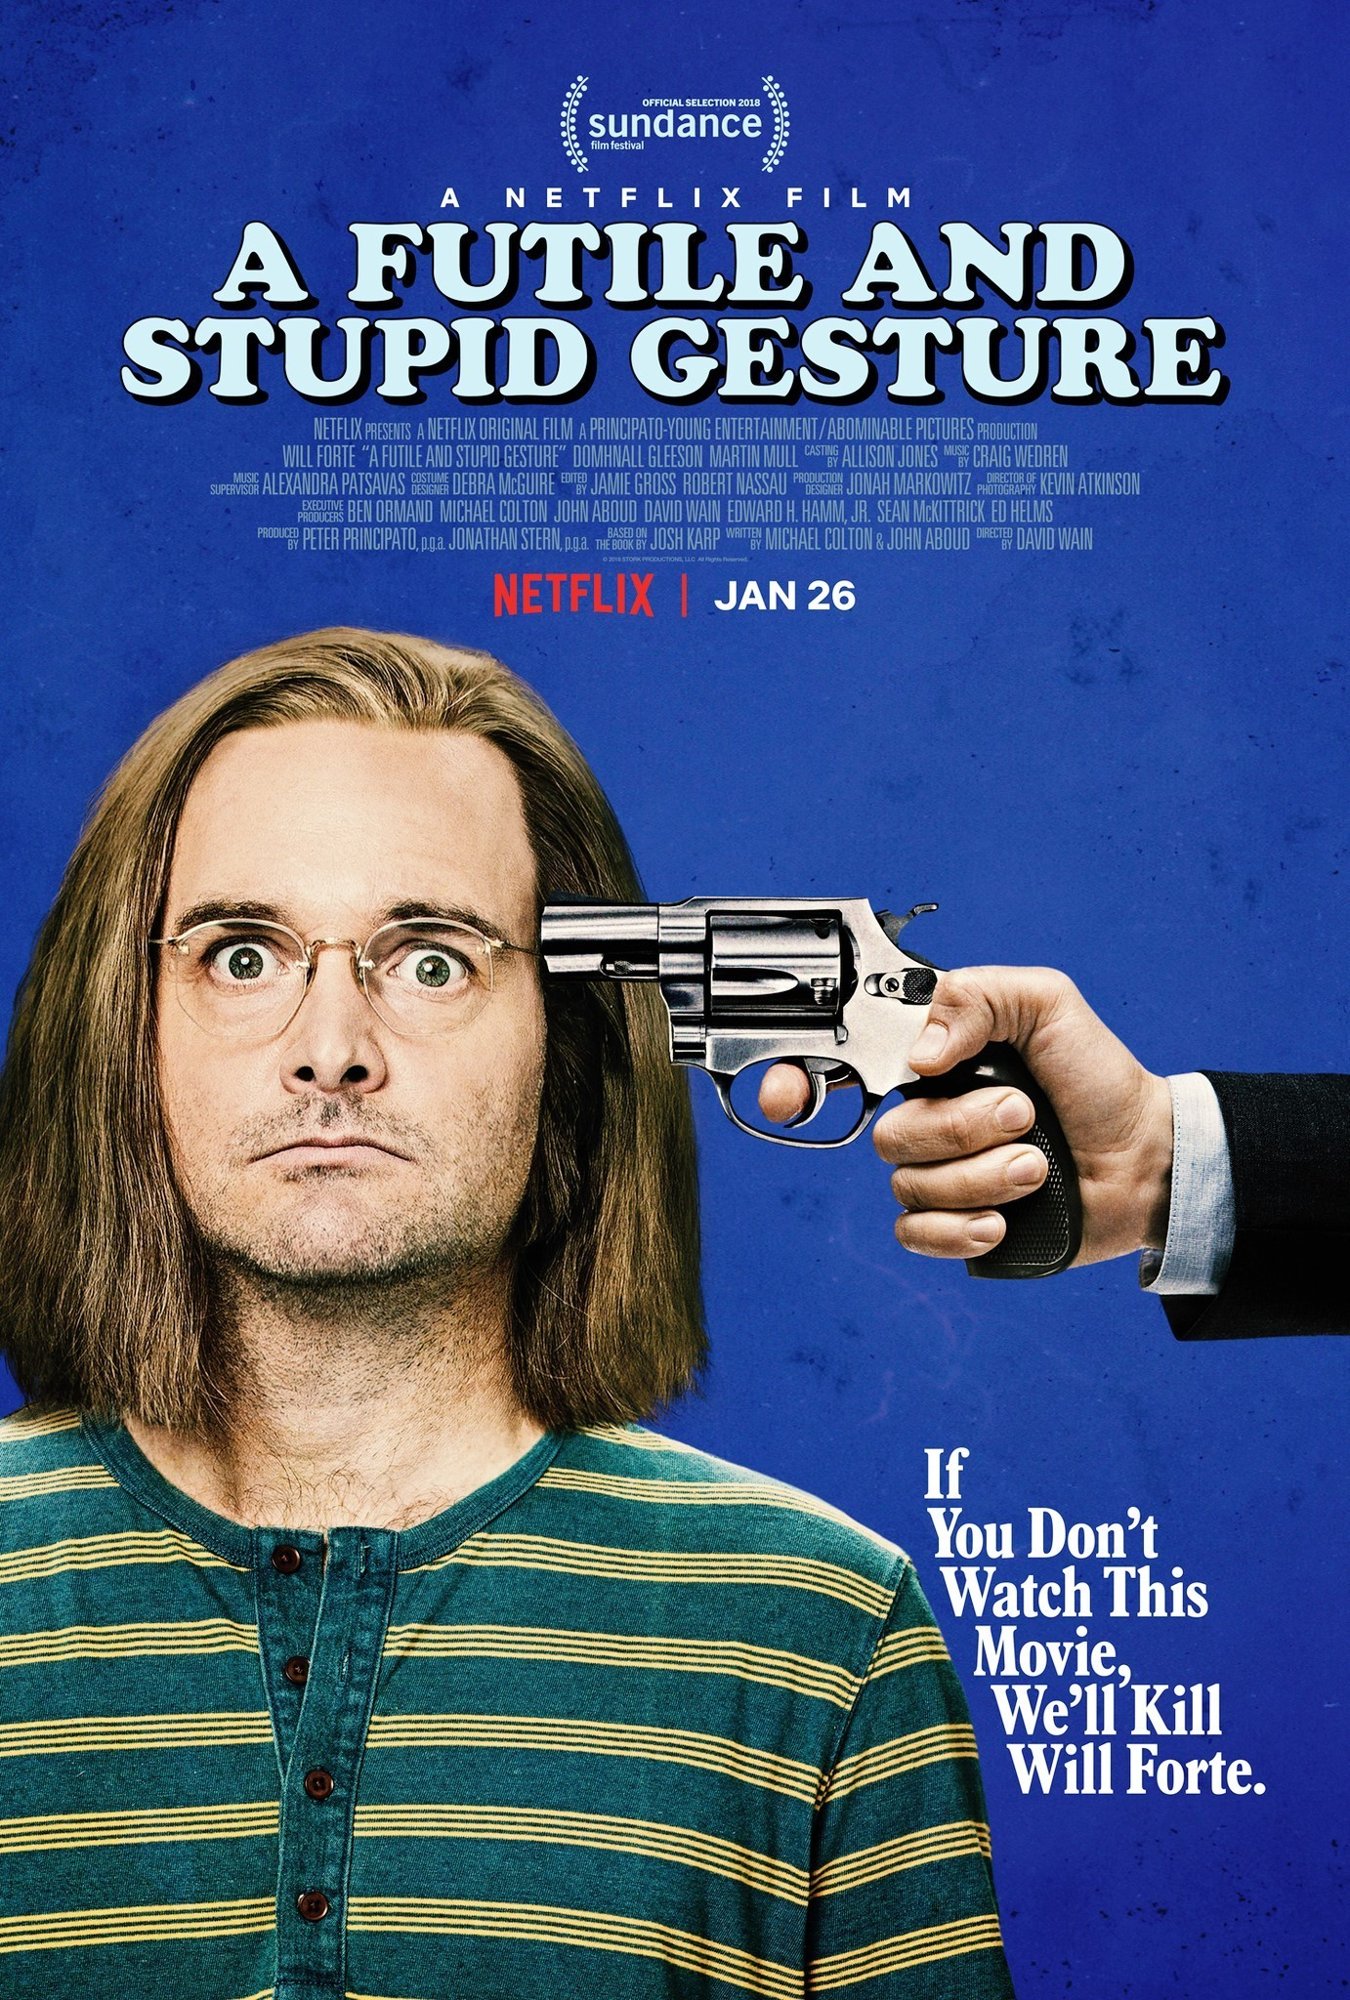 Poster of Netflix's A Futile and Stupid Gesture (2018)